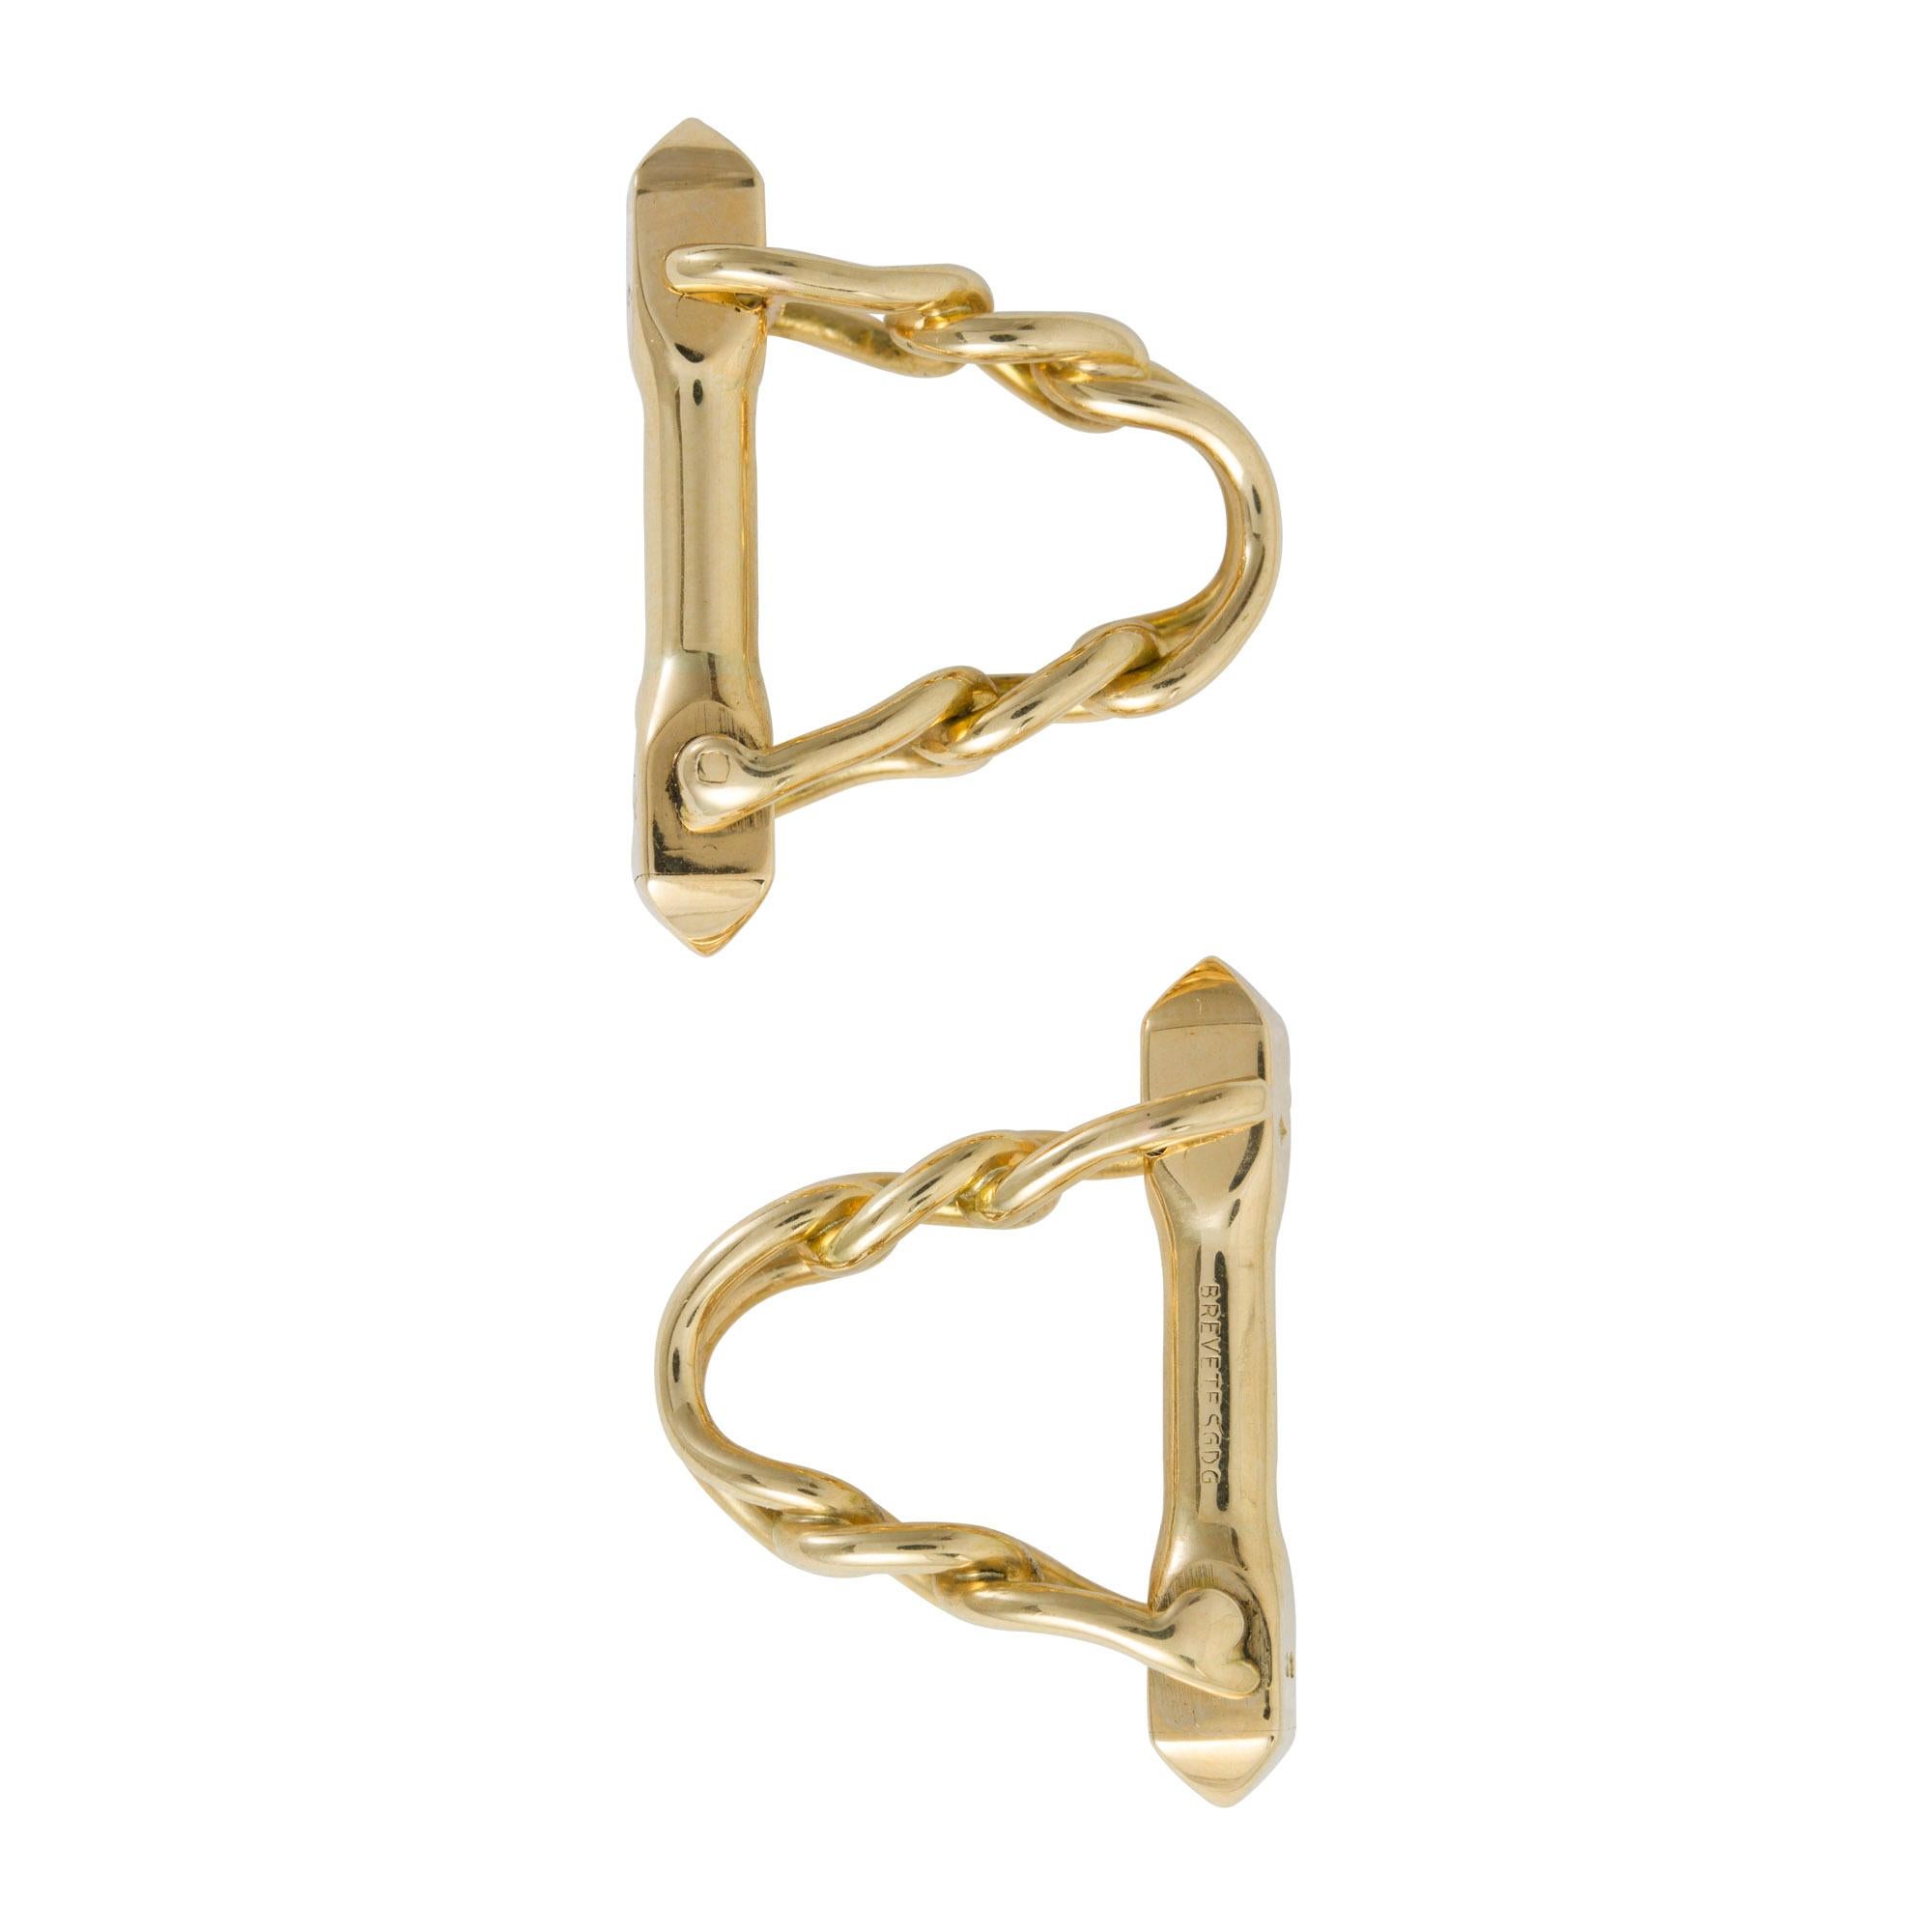 A pair of French gold cufflinks, the yellow gold chain link designed stirrup cufflinks, each with a hinged bar, bearing French gold hallmarks for 18ct gold, circa 1950, measuring approximately 2.1 x 1.5cm, gross weight 12.0 grams.

Should you choose